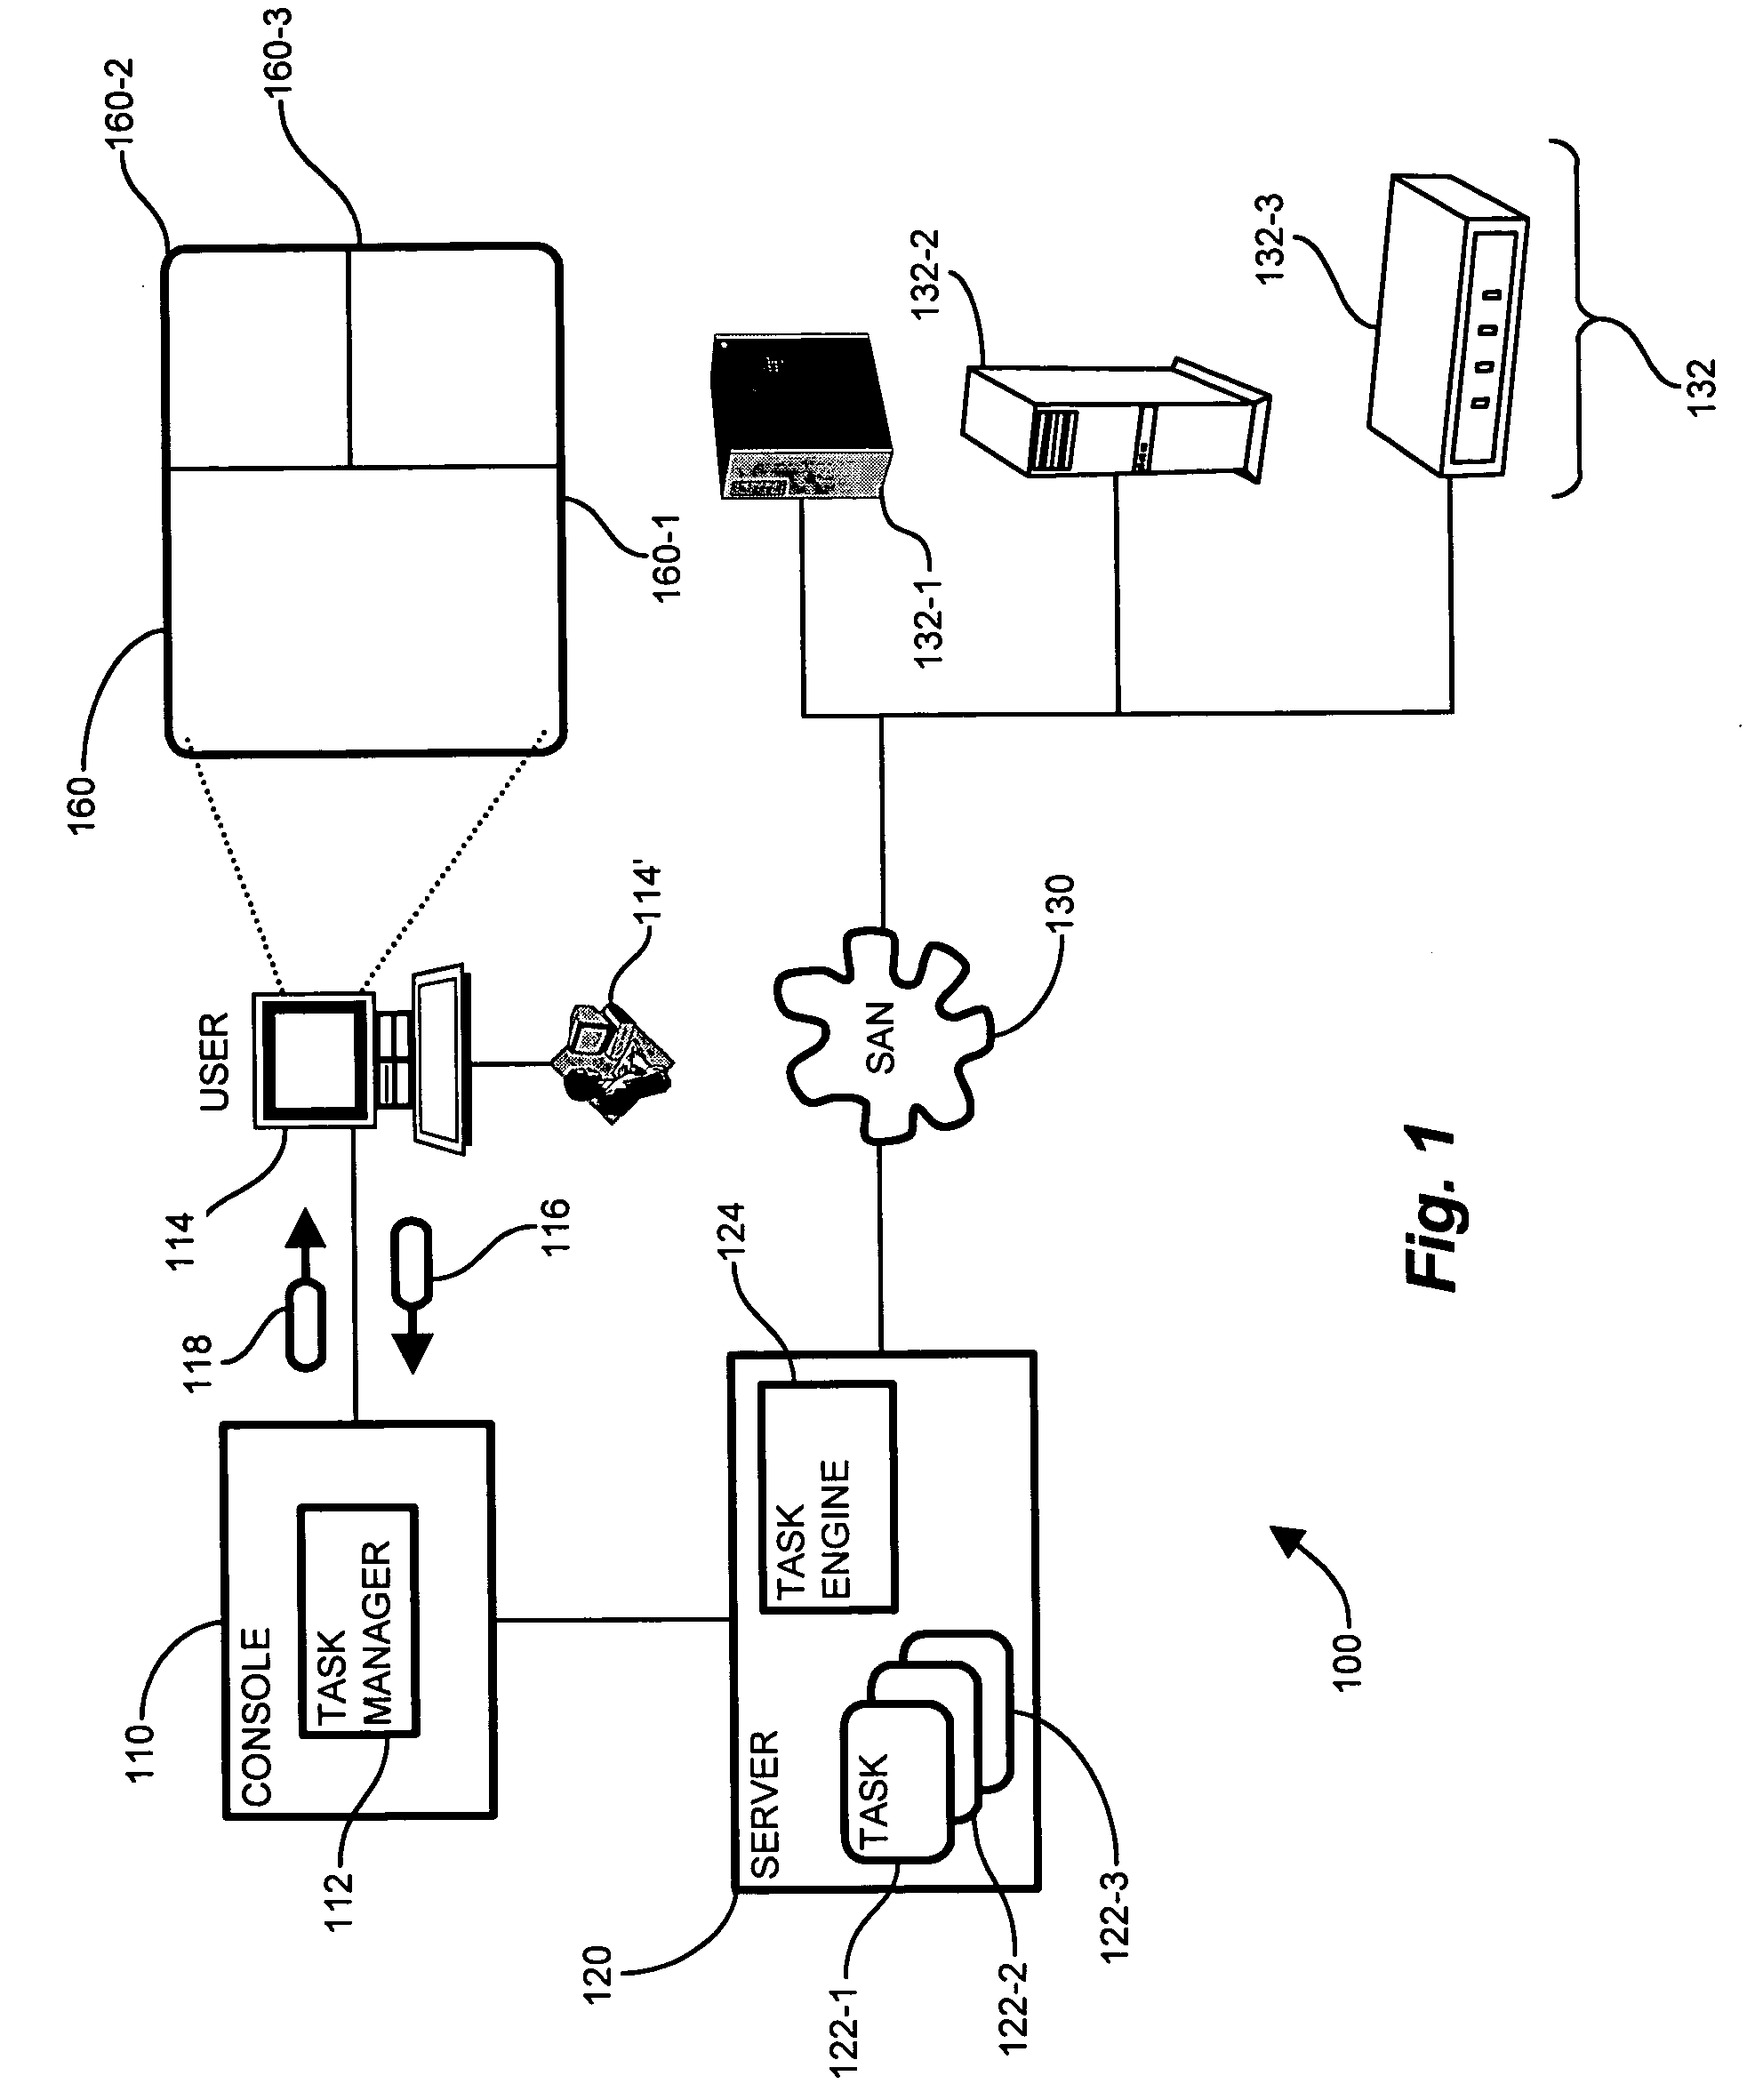 System and methods for a task management user interface